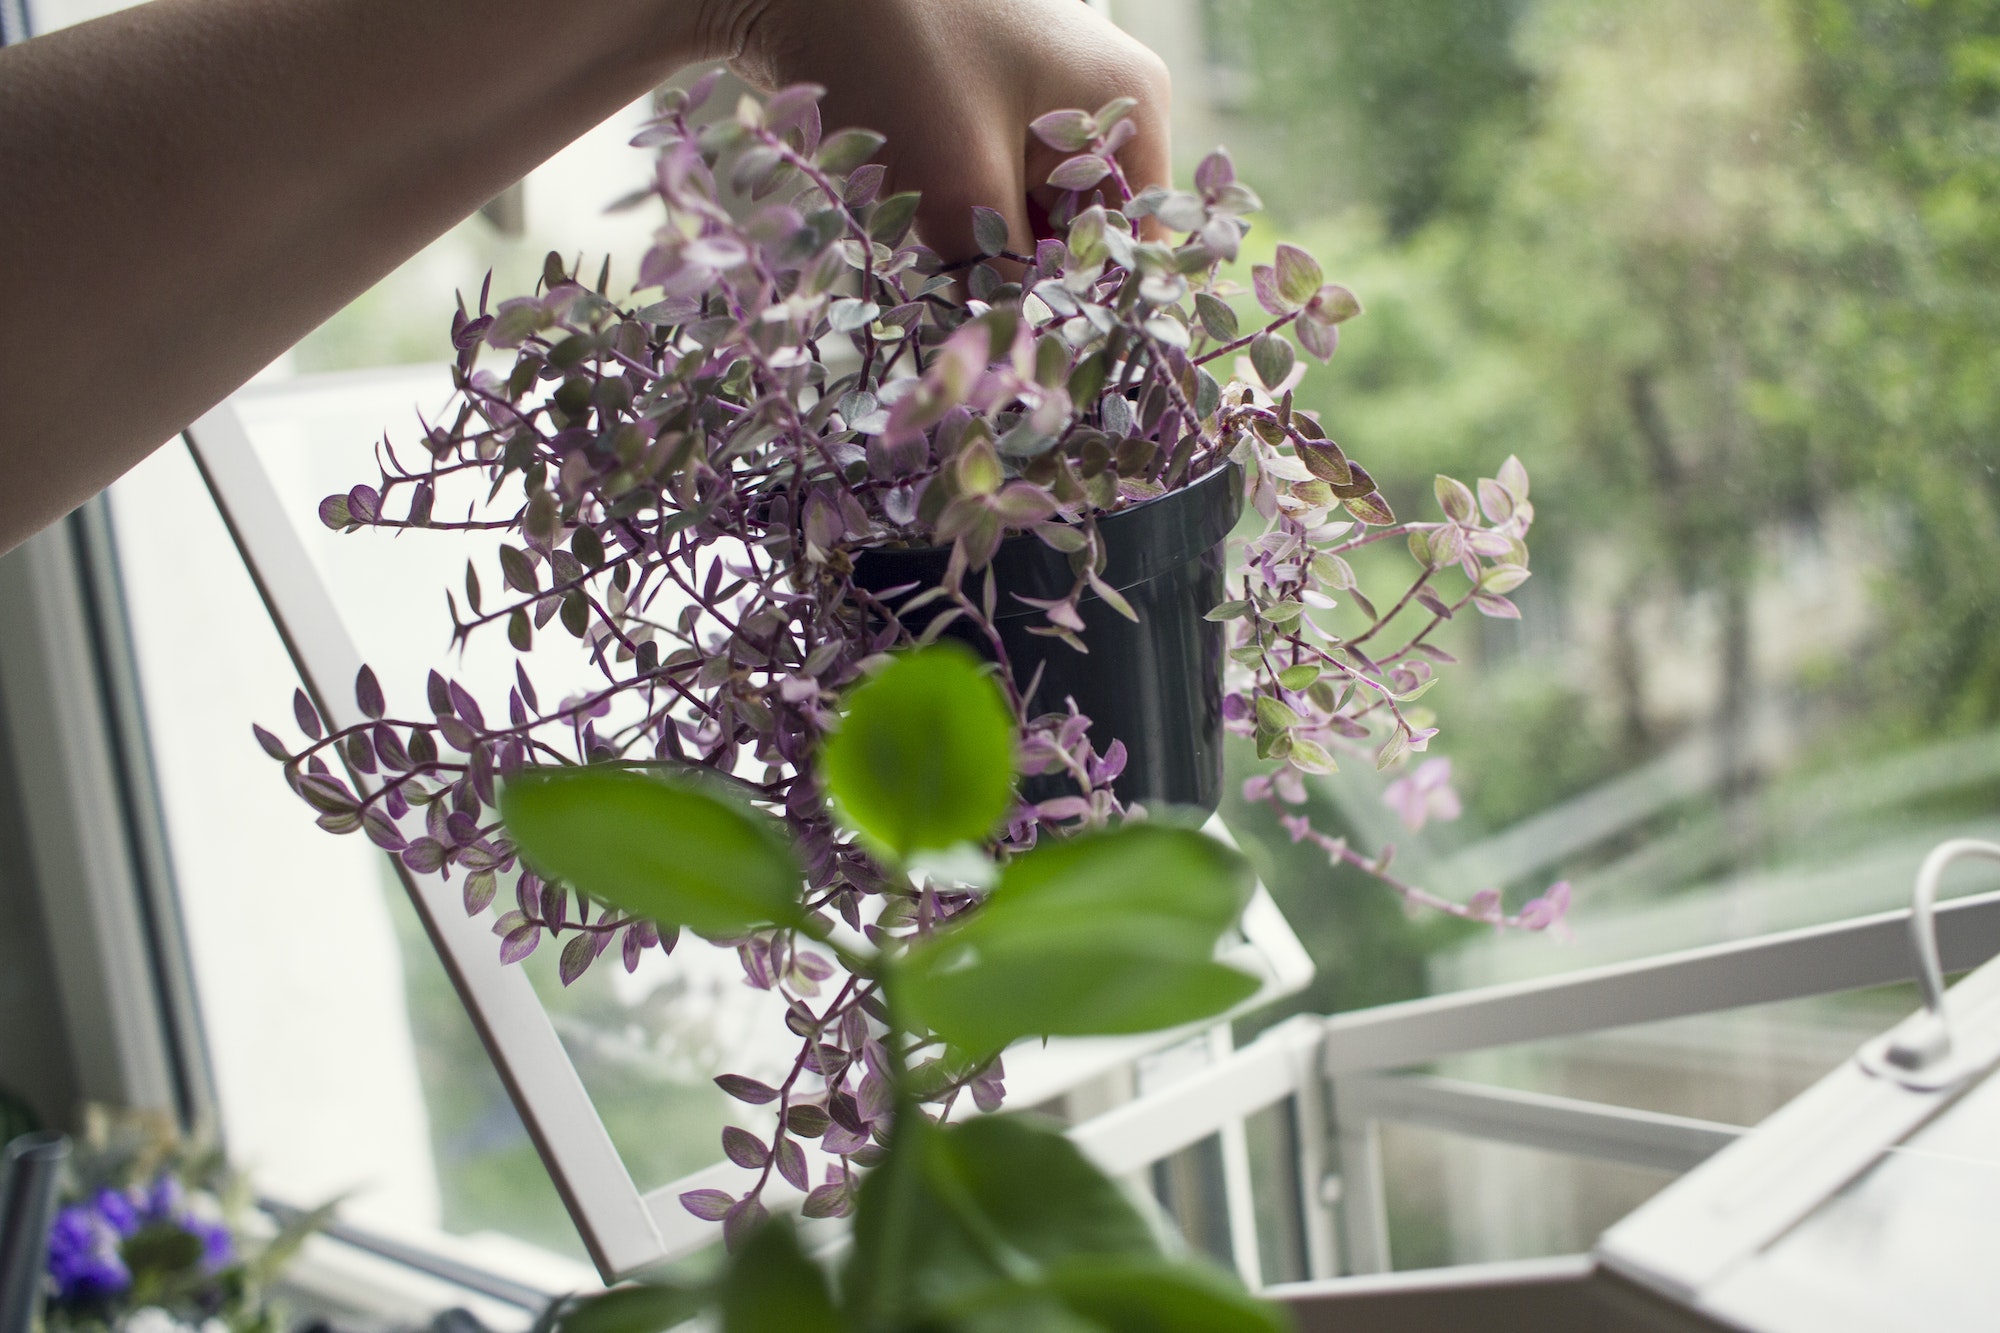 Woman's hand removing potted plant from windowsill terrarium